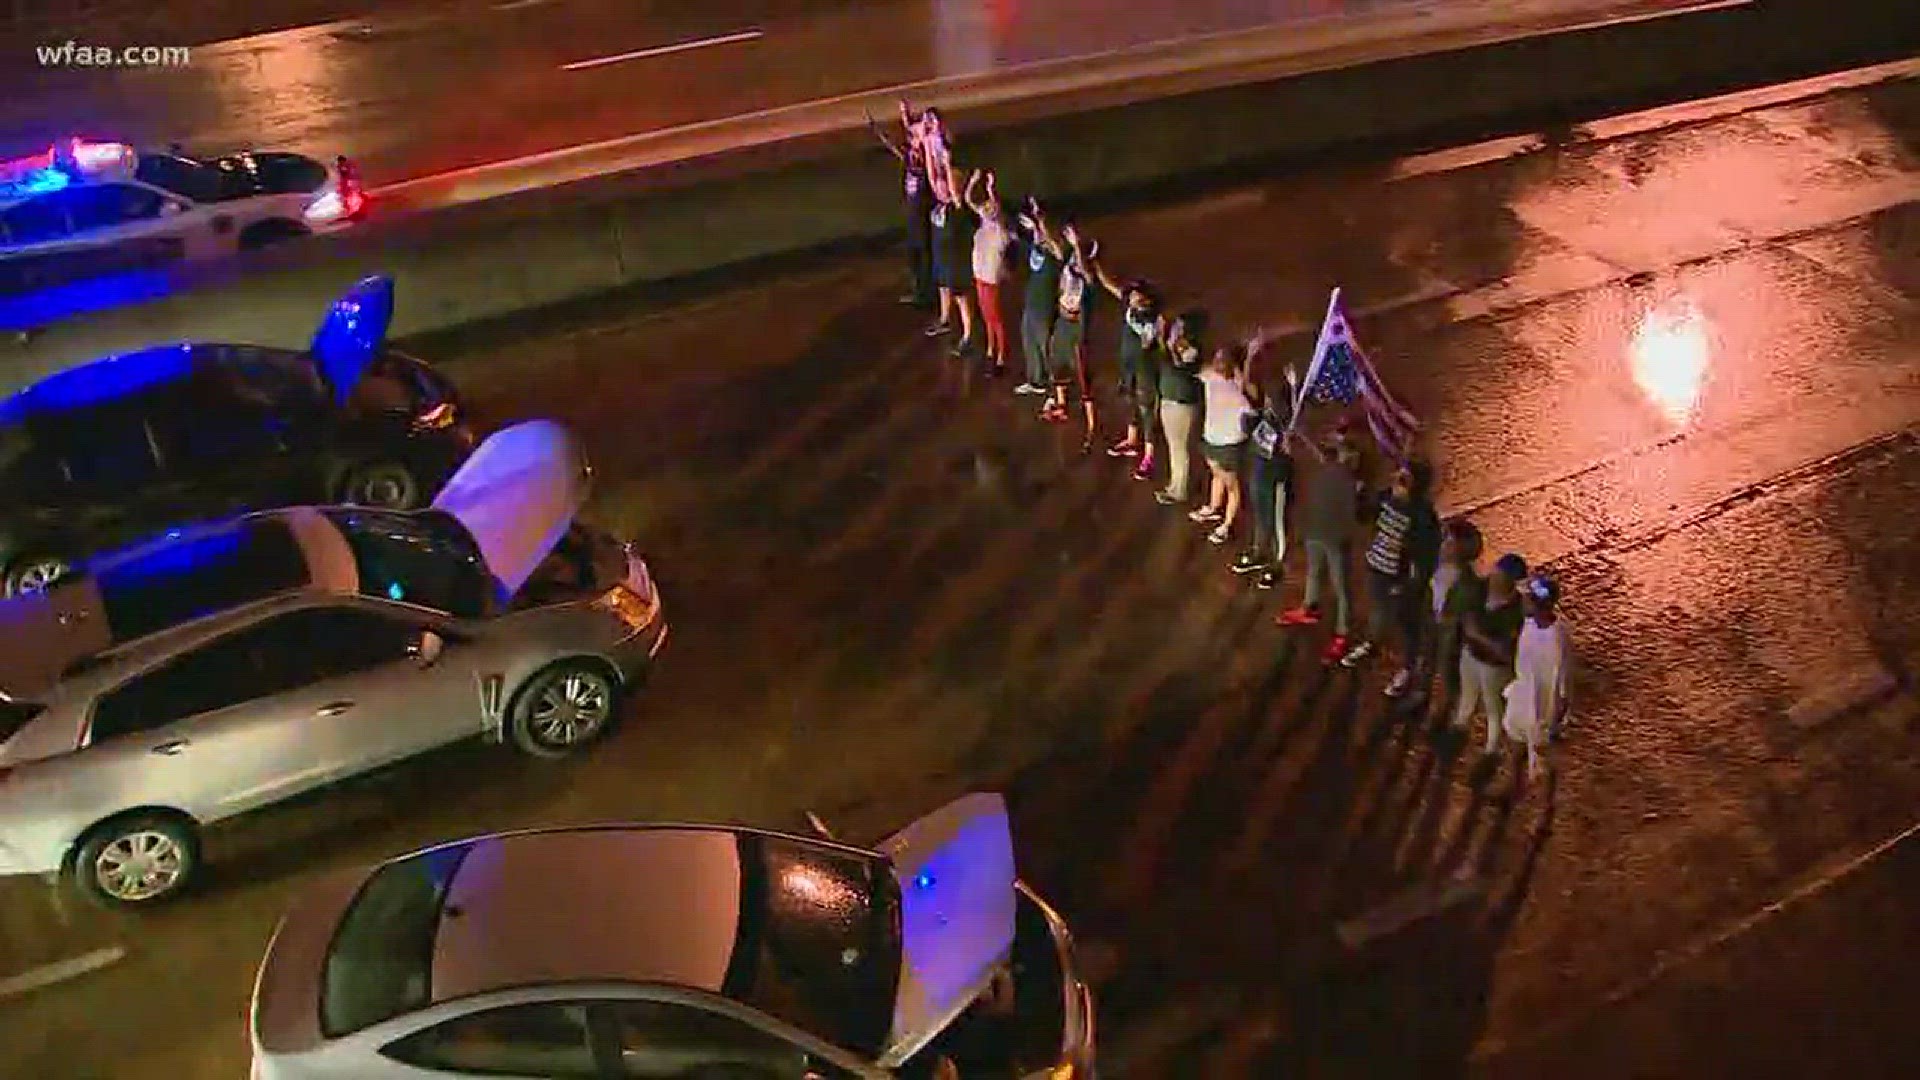 At one point Friday night, a group of protesters shut down I-30 near downtown Dallas.